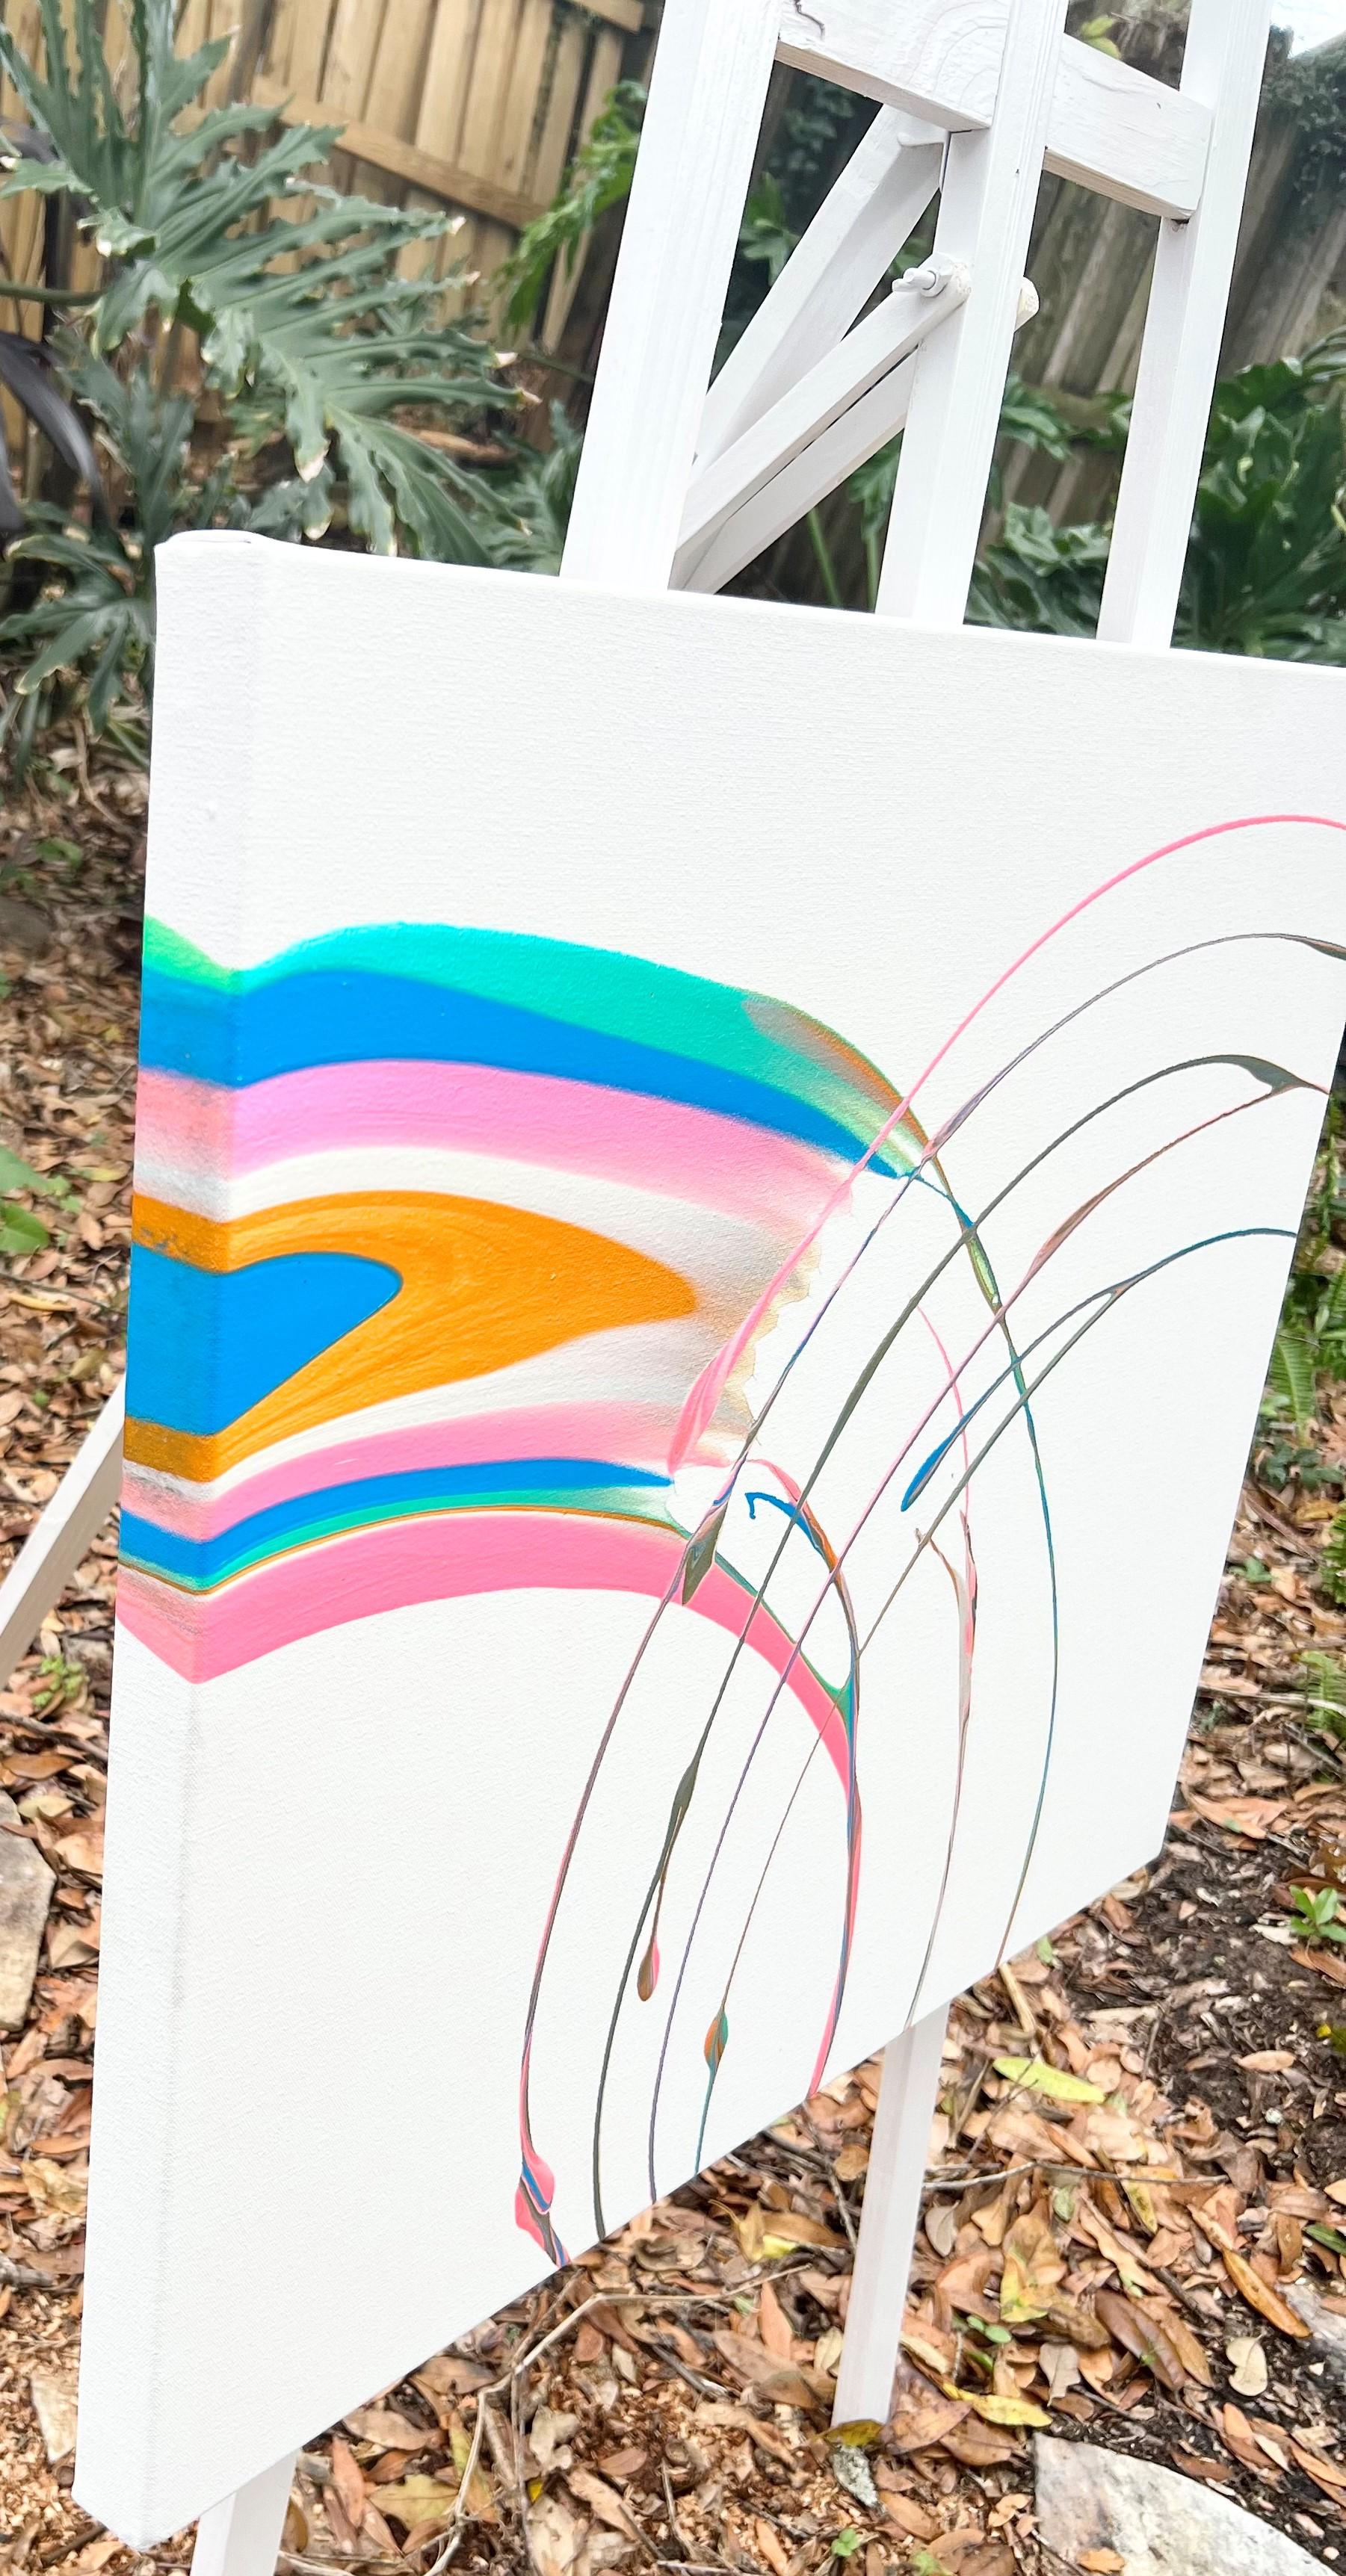 <p>Artist Comments<br>Eric Wilson demonstrates a playful, minimalistic abstract of pastel colors that swish across the canvas with perfect harmony. â€œA lot of my works have some sort of circular gestural movements,â€ says Eric. The piece stands as